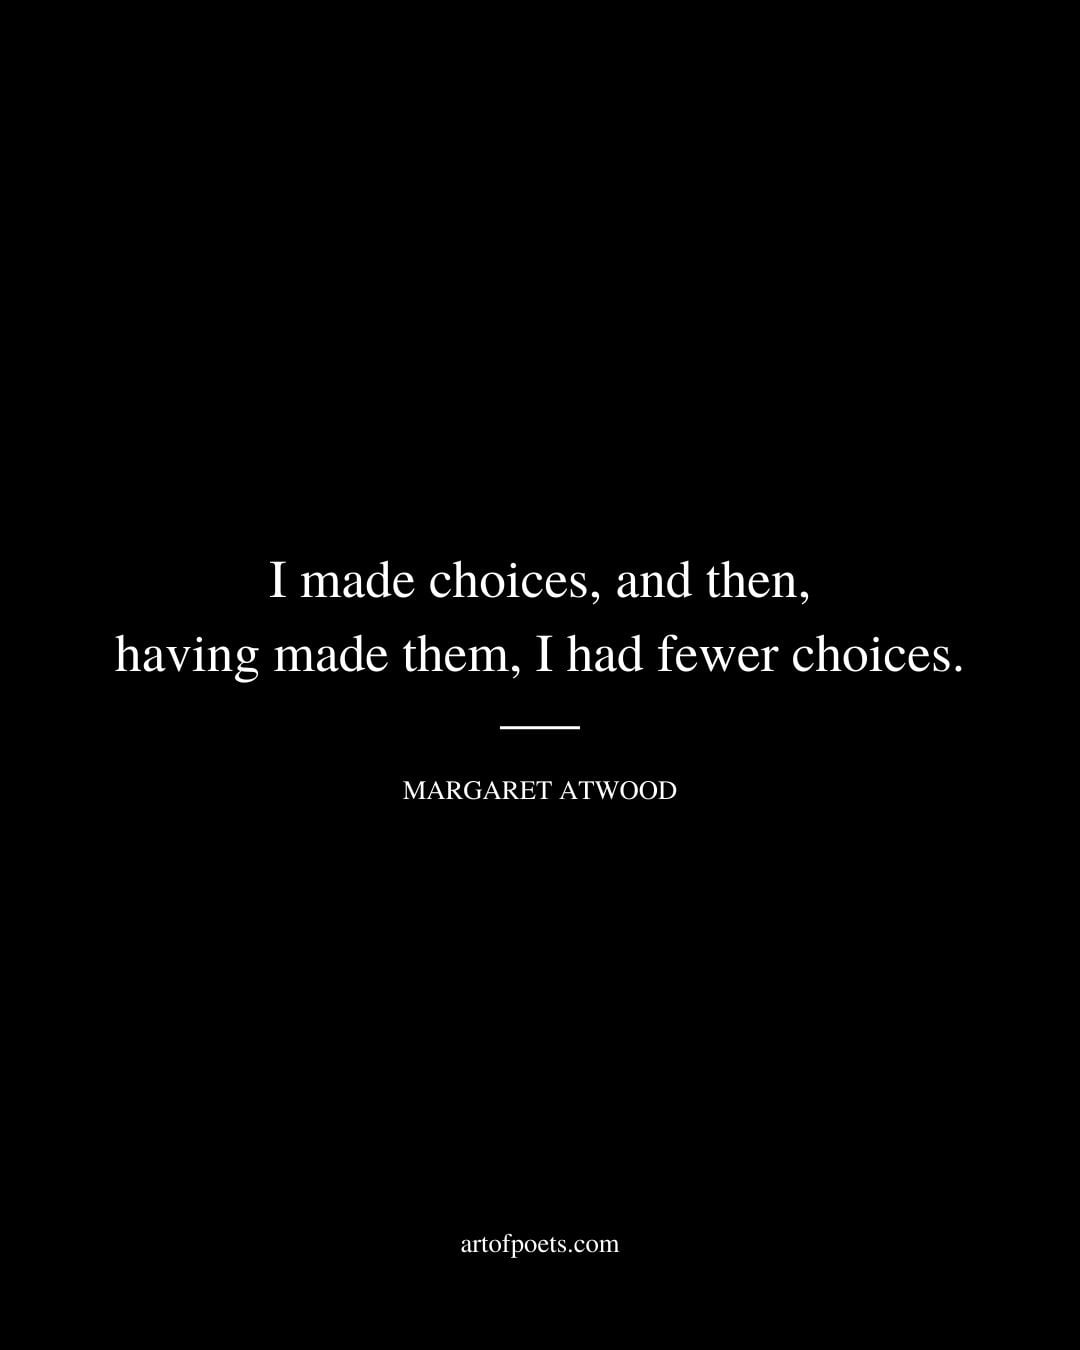 I made choices and then having made them I had fewer choices. Margaret Atwood